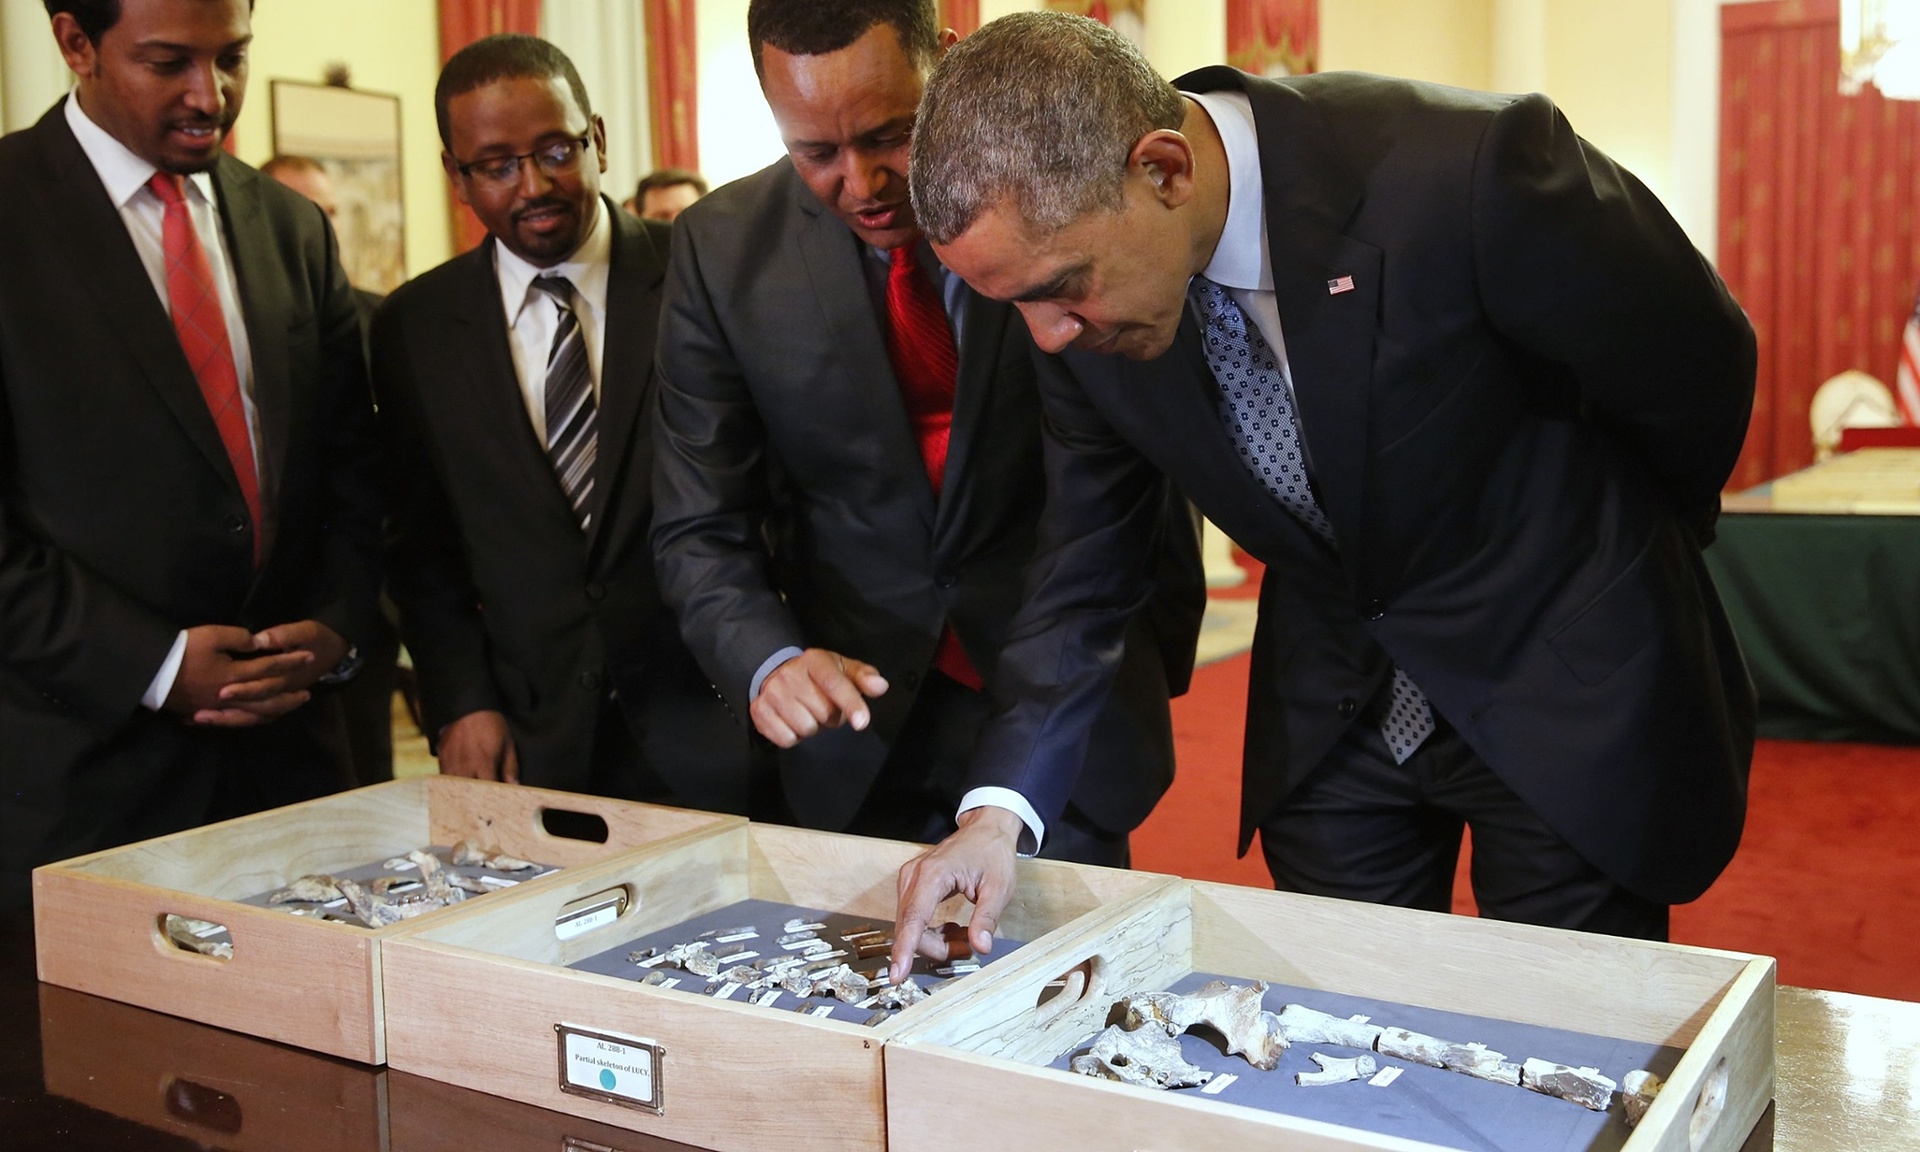 Obama in Africa: 12 Things We Learned From His Historic Trip